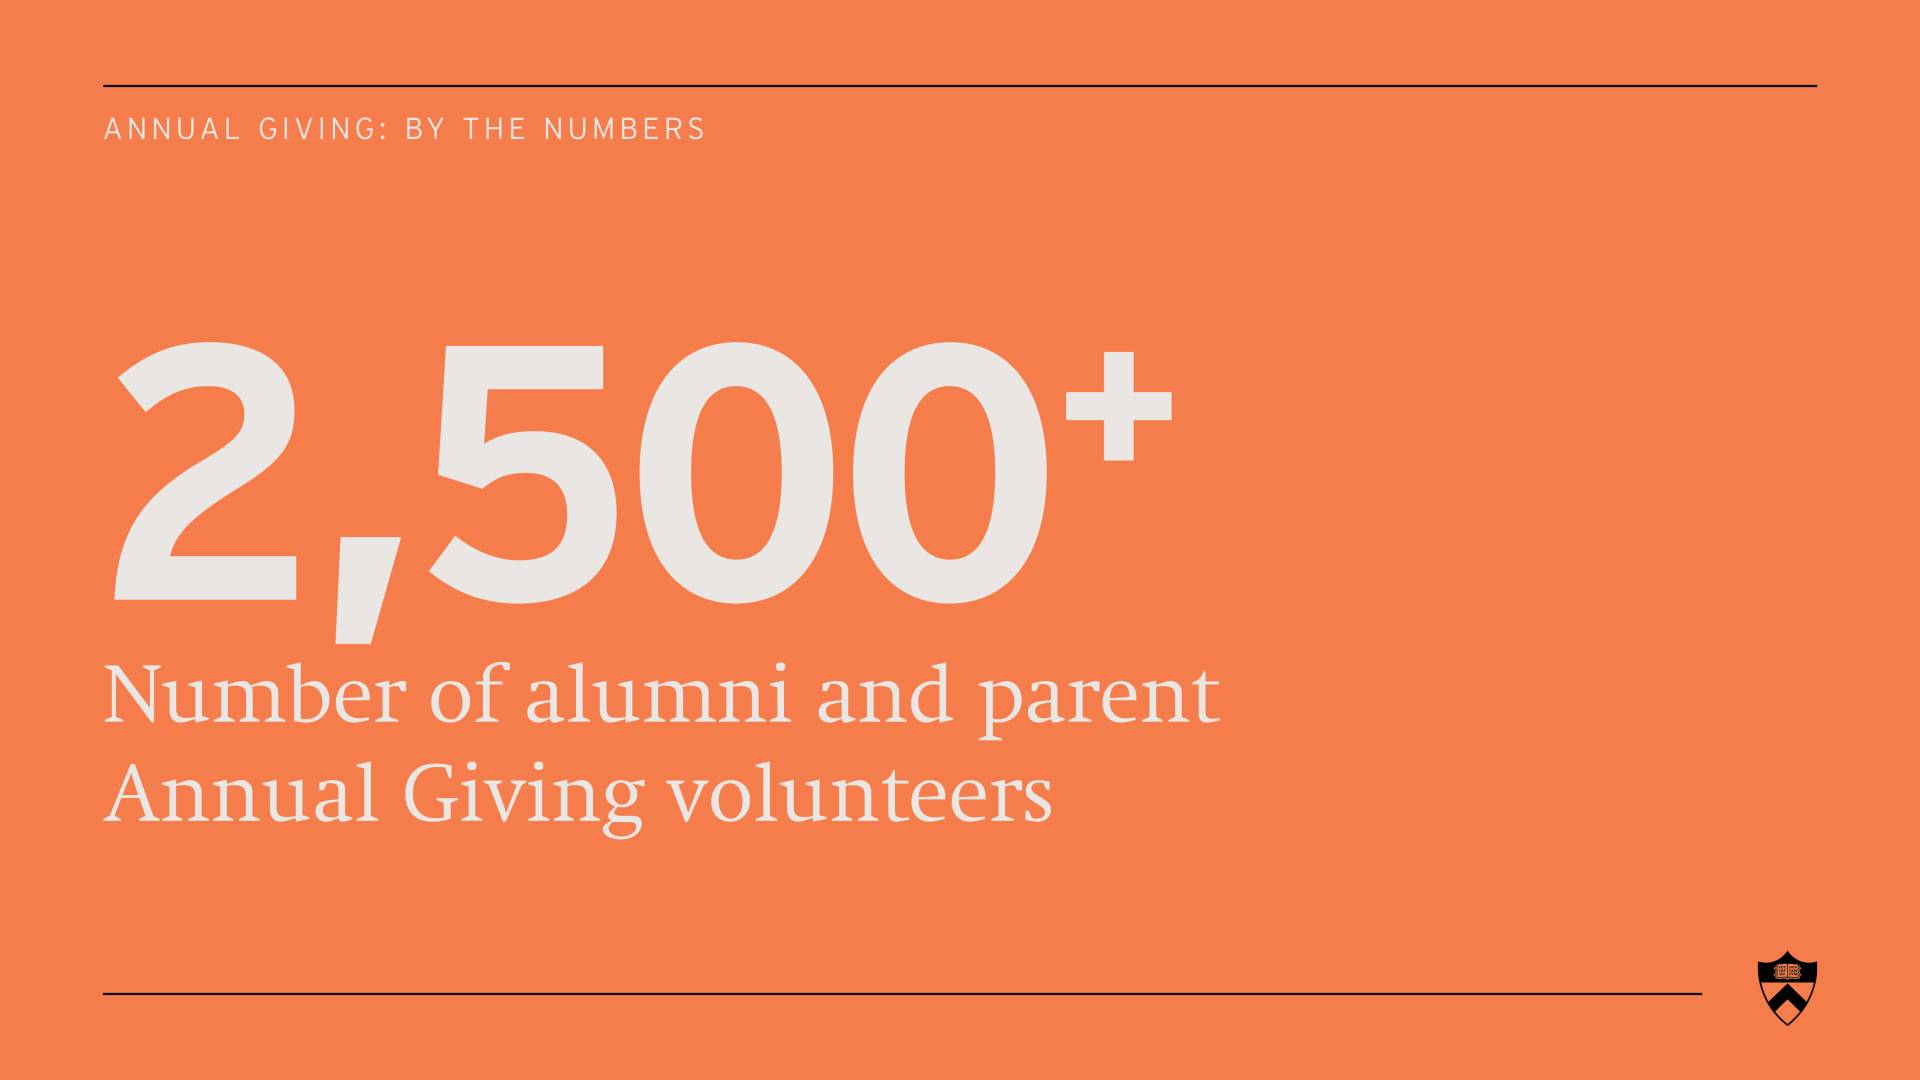 Number of alumni and parent Annual Giving volunteers - 2,500+